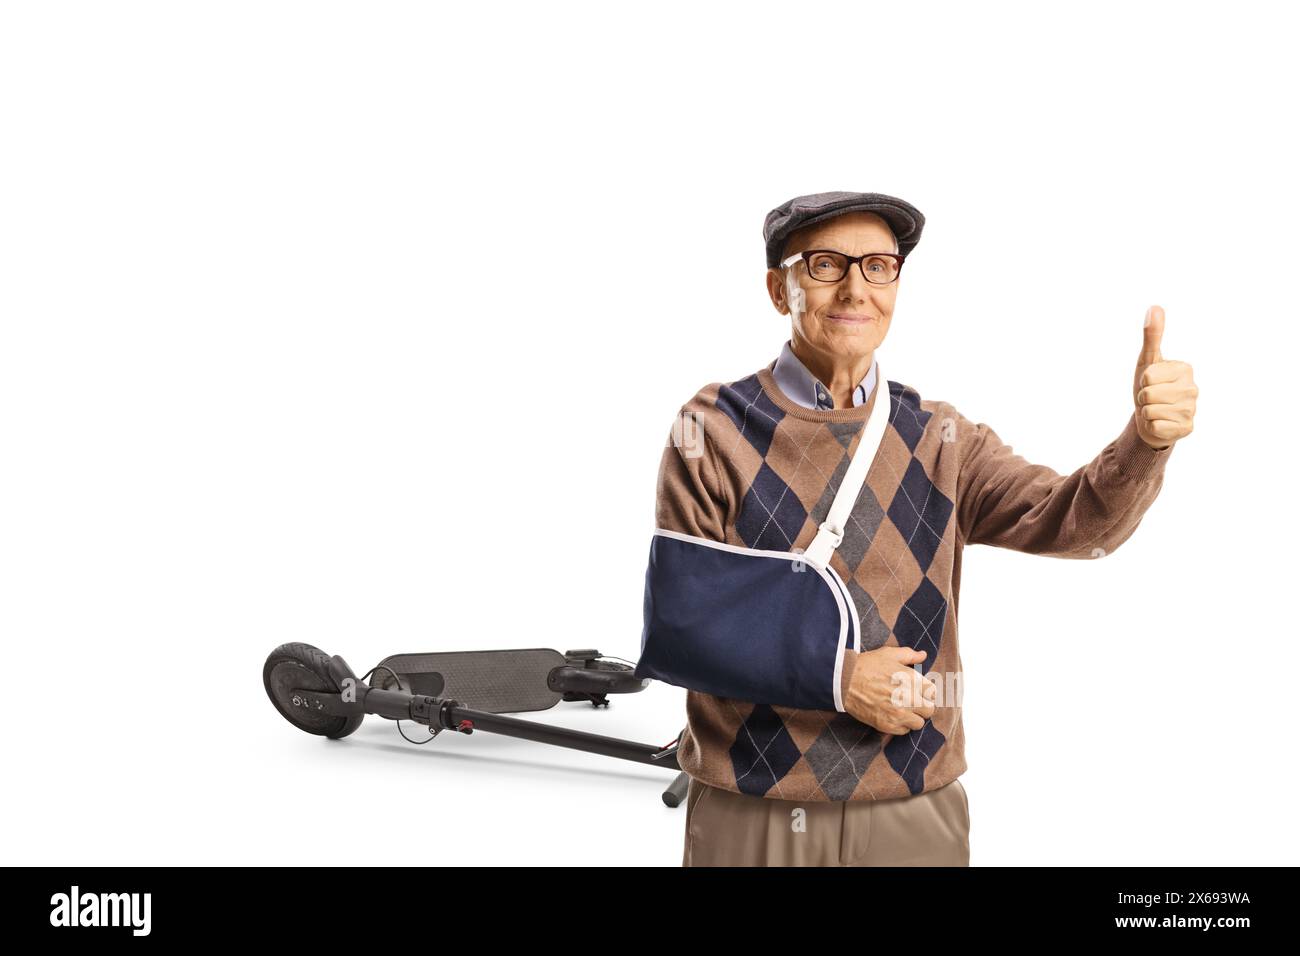 Elderly man with a broken arm gesturing thumbs up isolated on white background, electric scooter accident concept Stock Photo